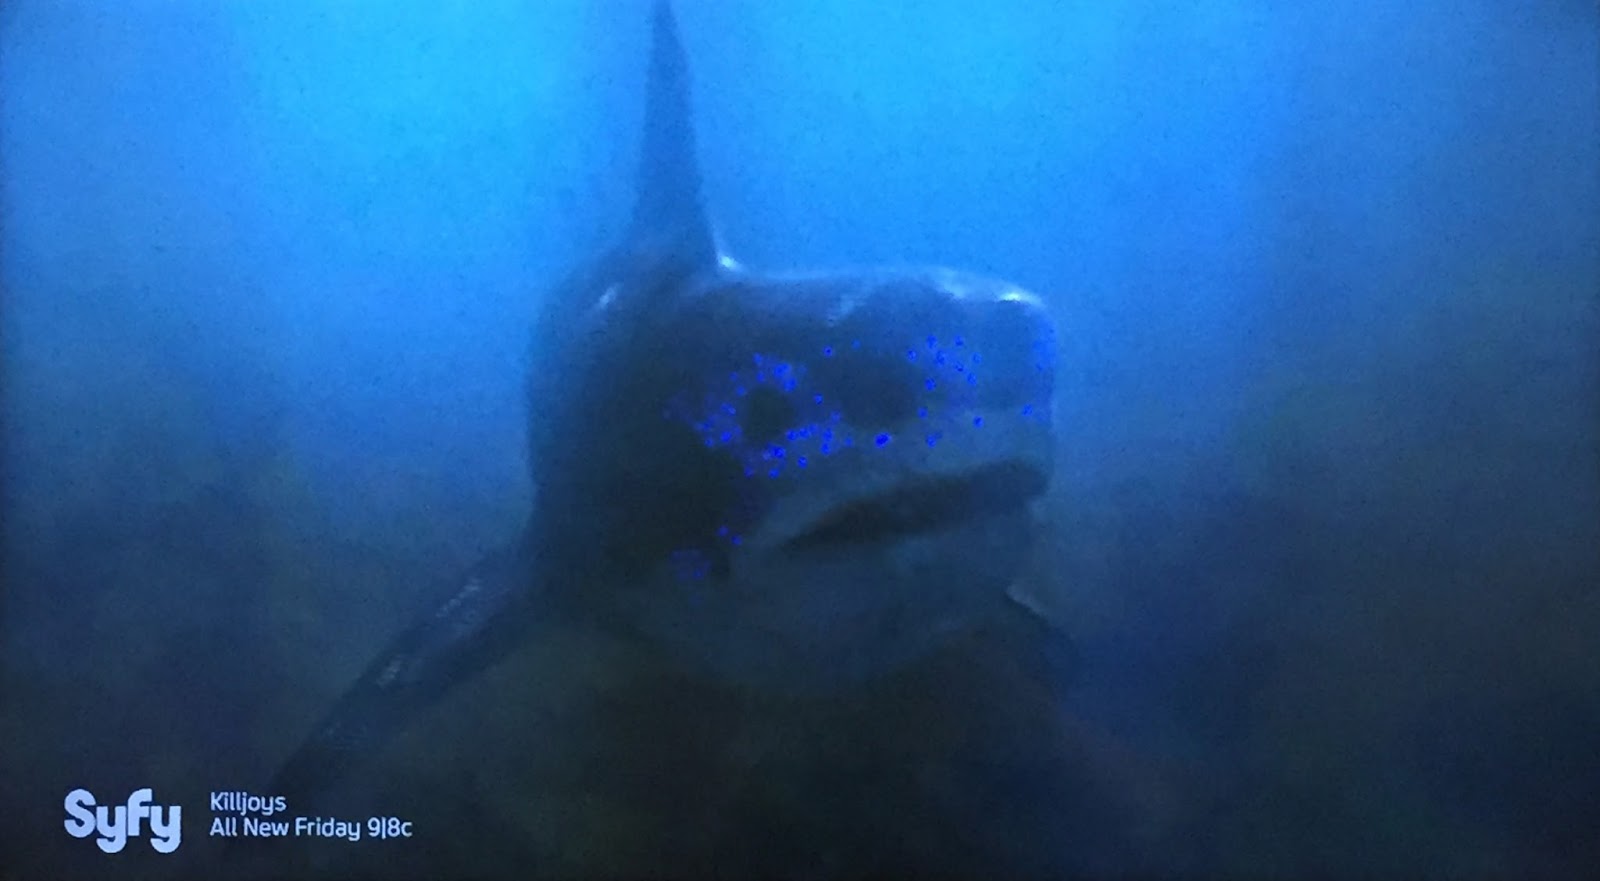 https://static.wikia.nocookie.net/non-aliencreatures/images/6/6a/Mutant_Alpha_Shark.jpg/revision/latest?cb=20180108042545